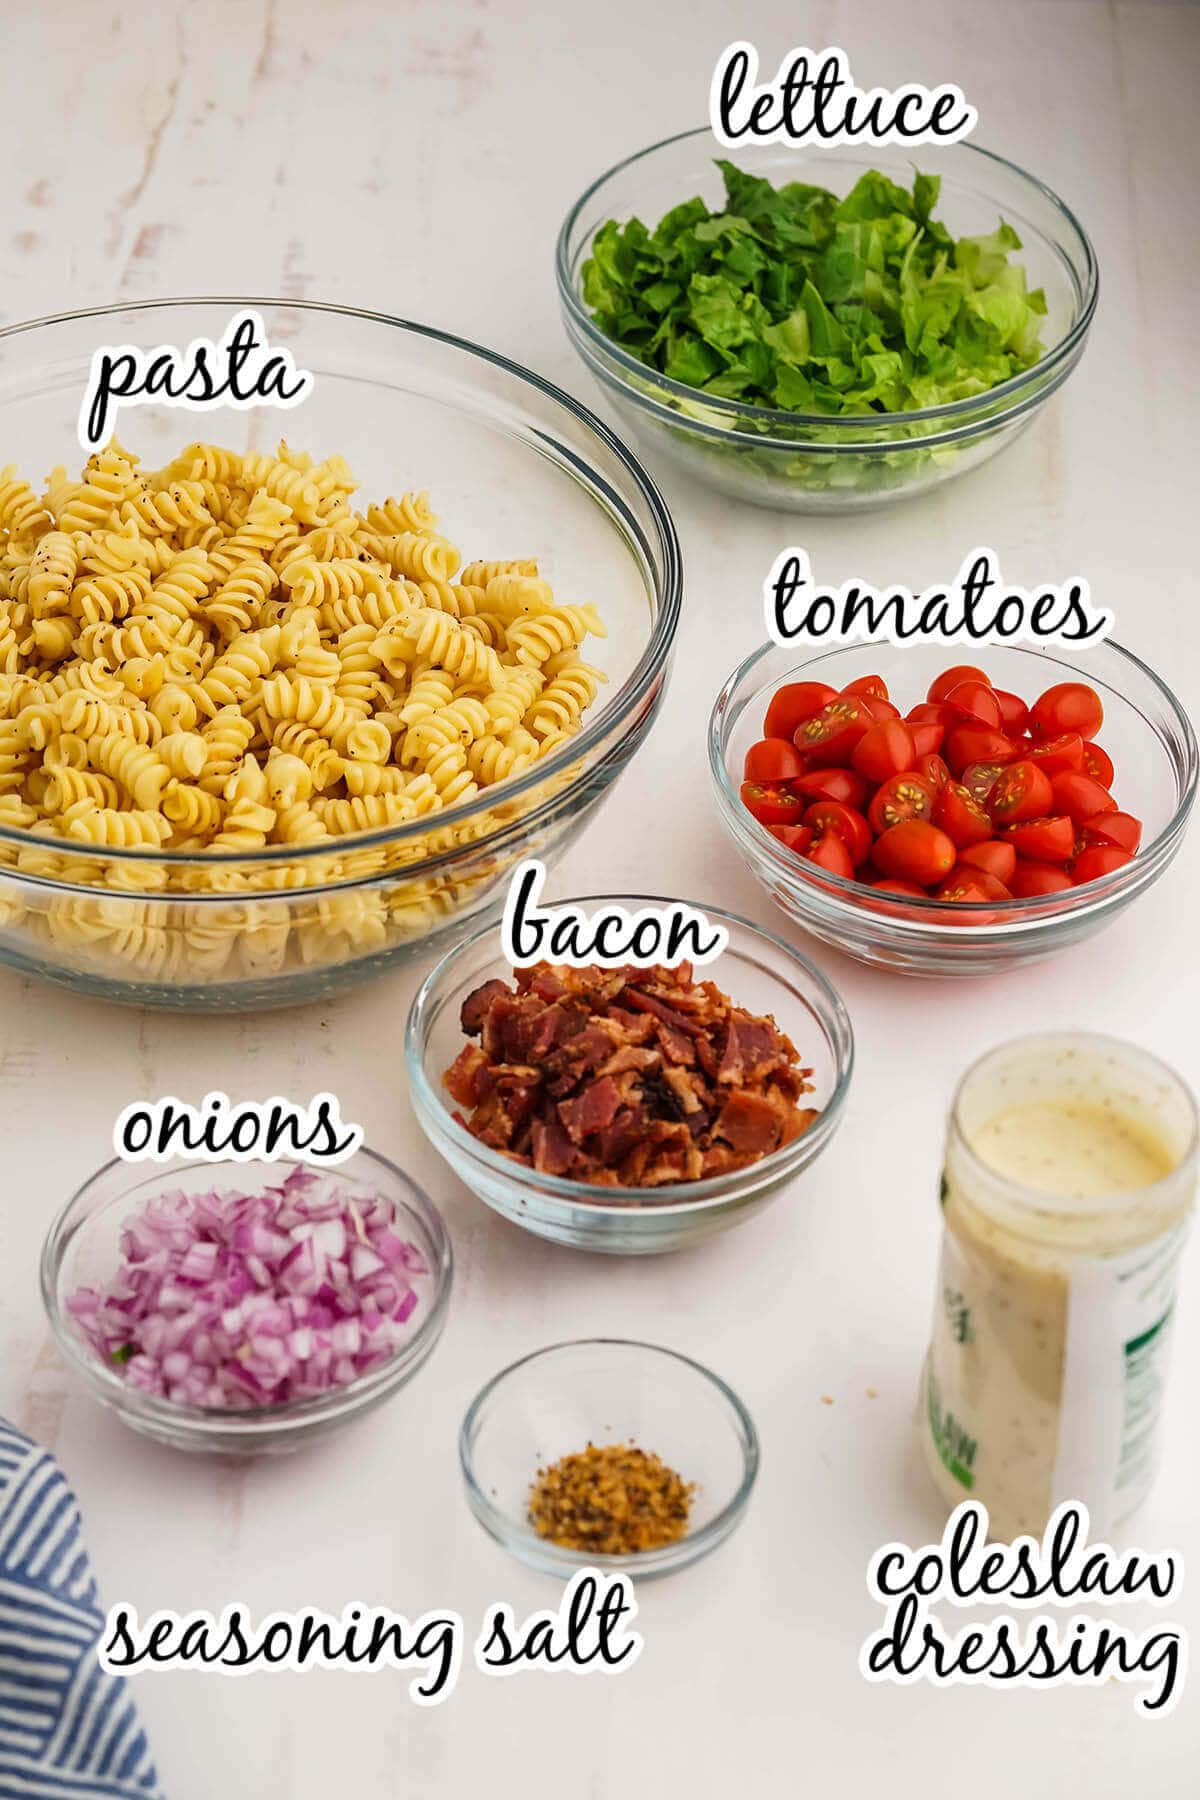 Ingredients needed to make pasta salad recipe. With print overlay.